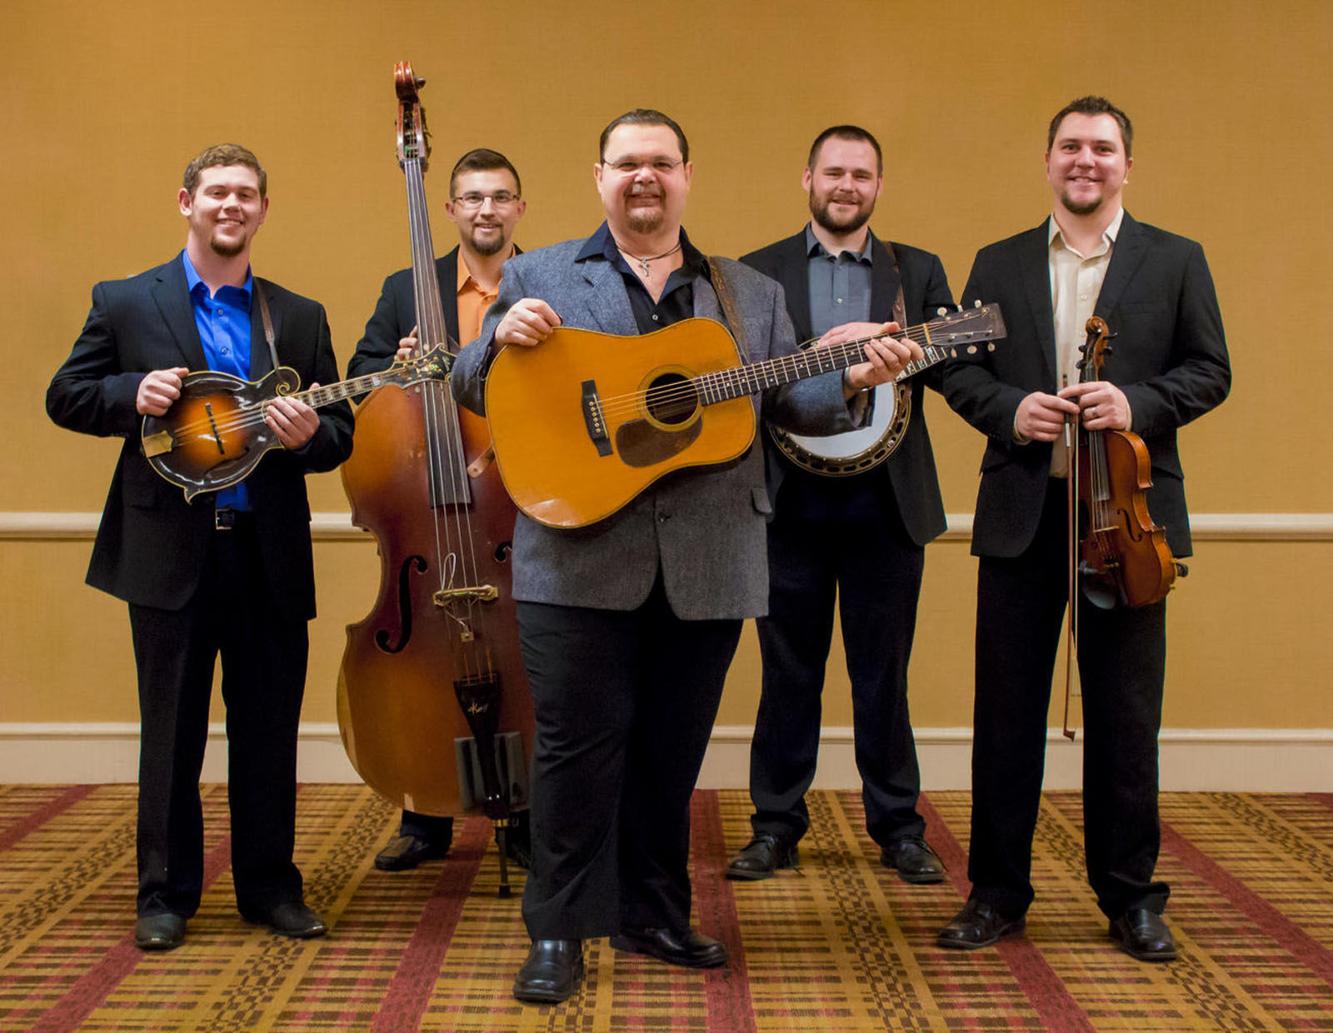 NC State Bluegrass Festival in Marion Day 2 schedule